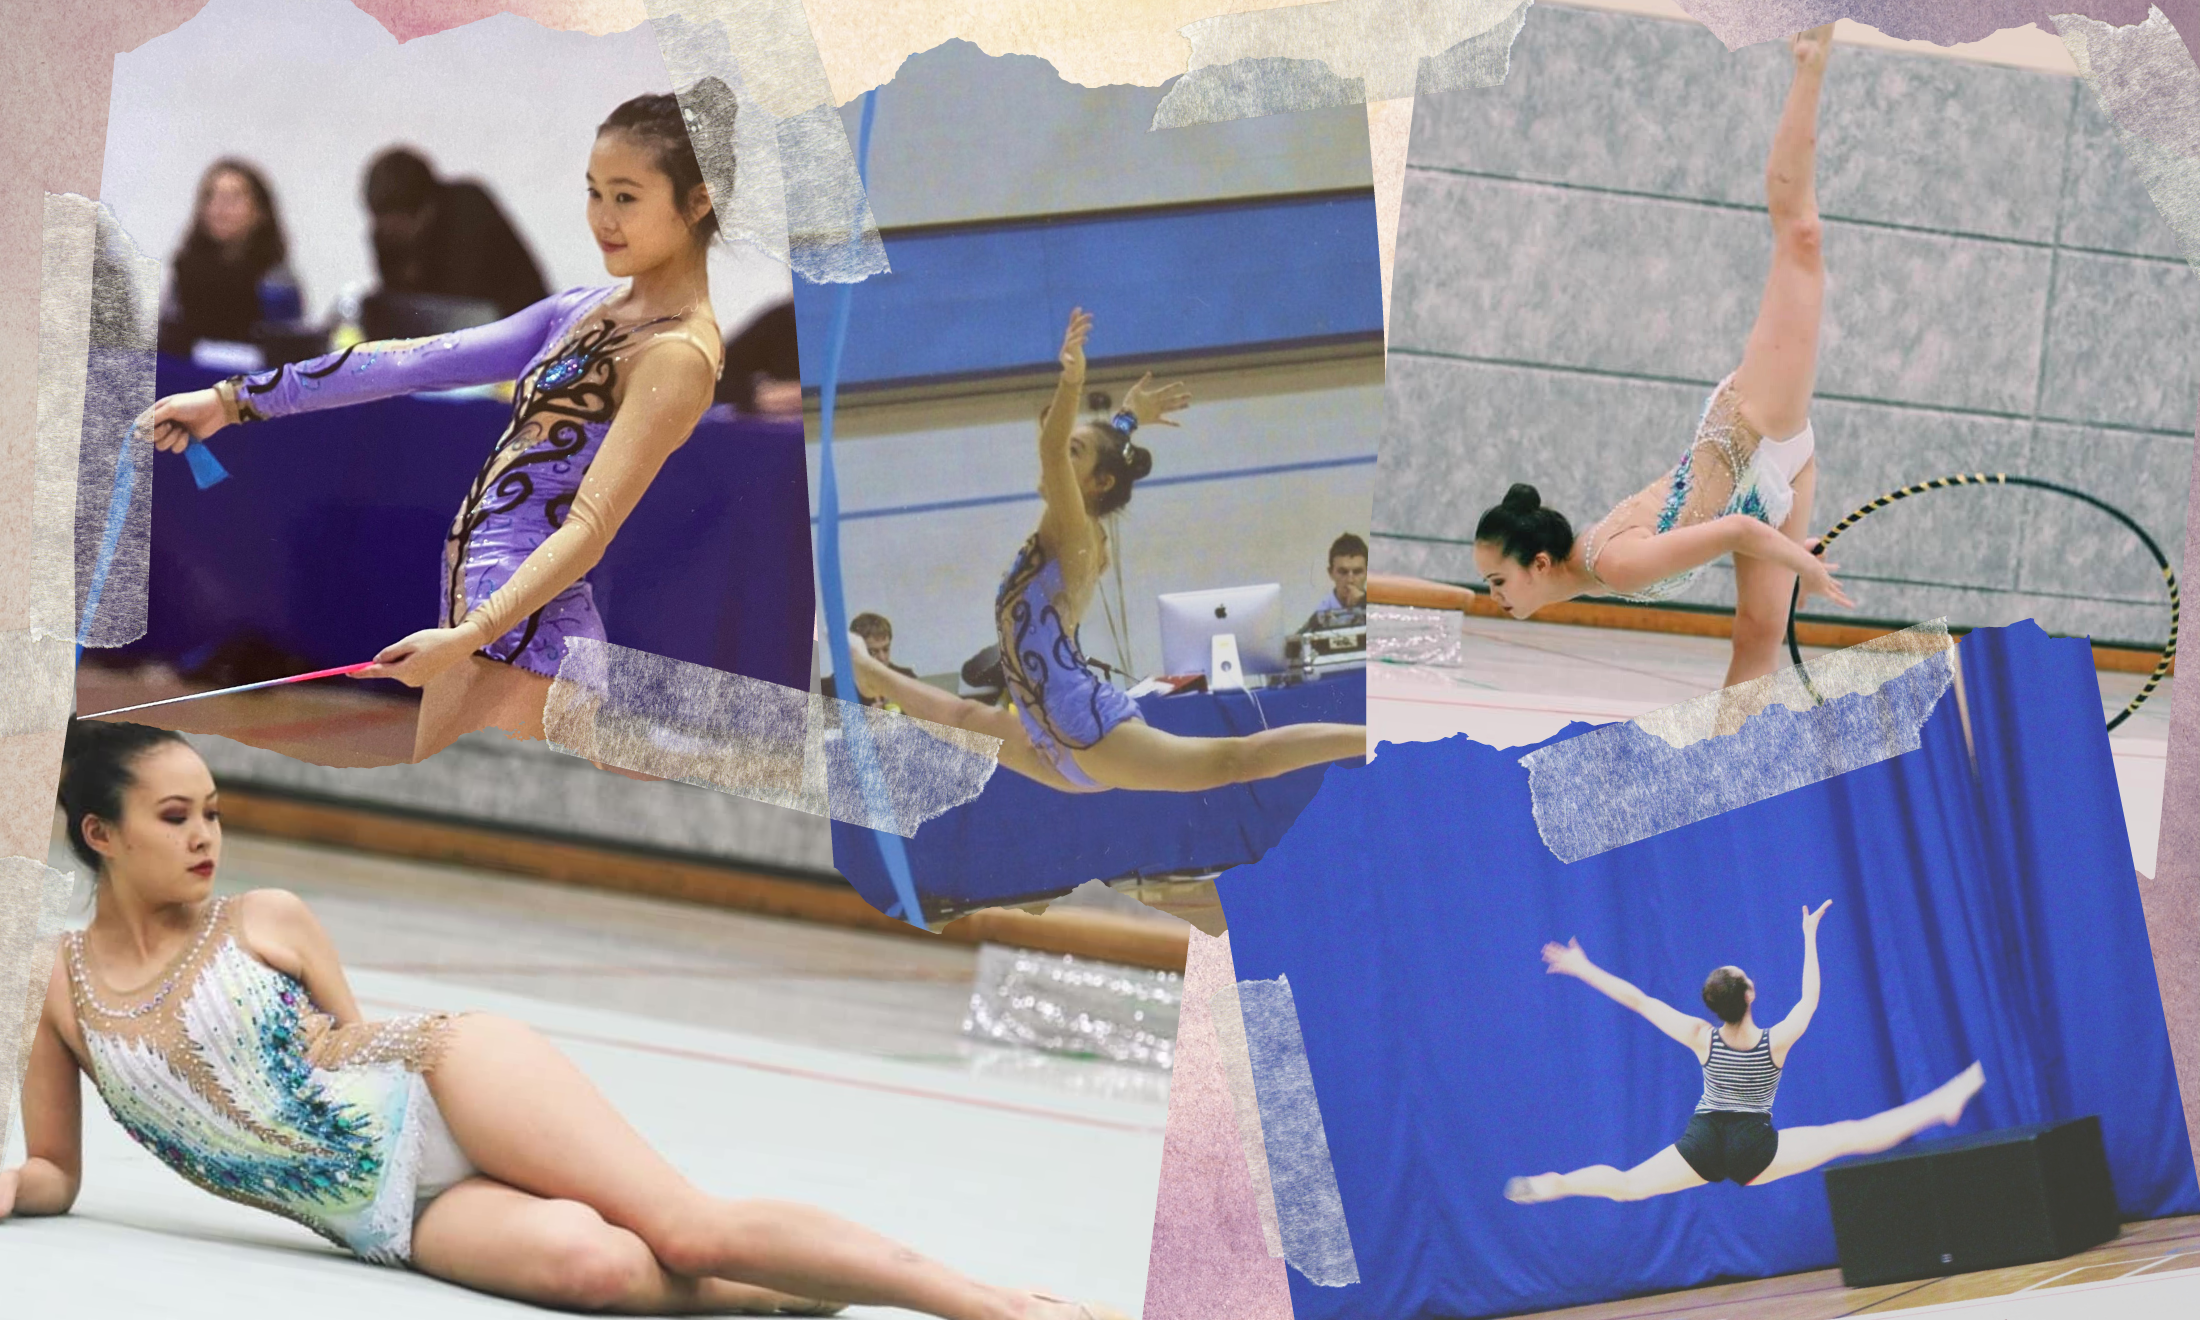 I was a teenage rhythmic gymnast. I’m not surprised by allegations of abuse and mistreatment in the sport